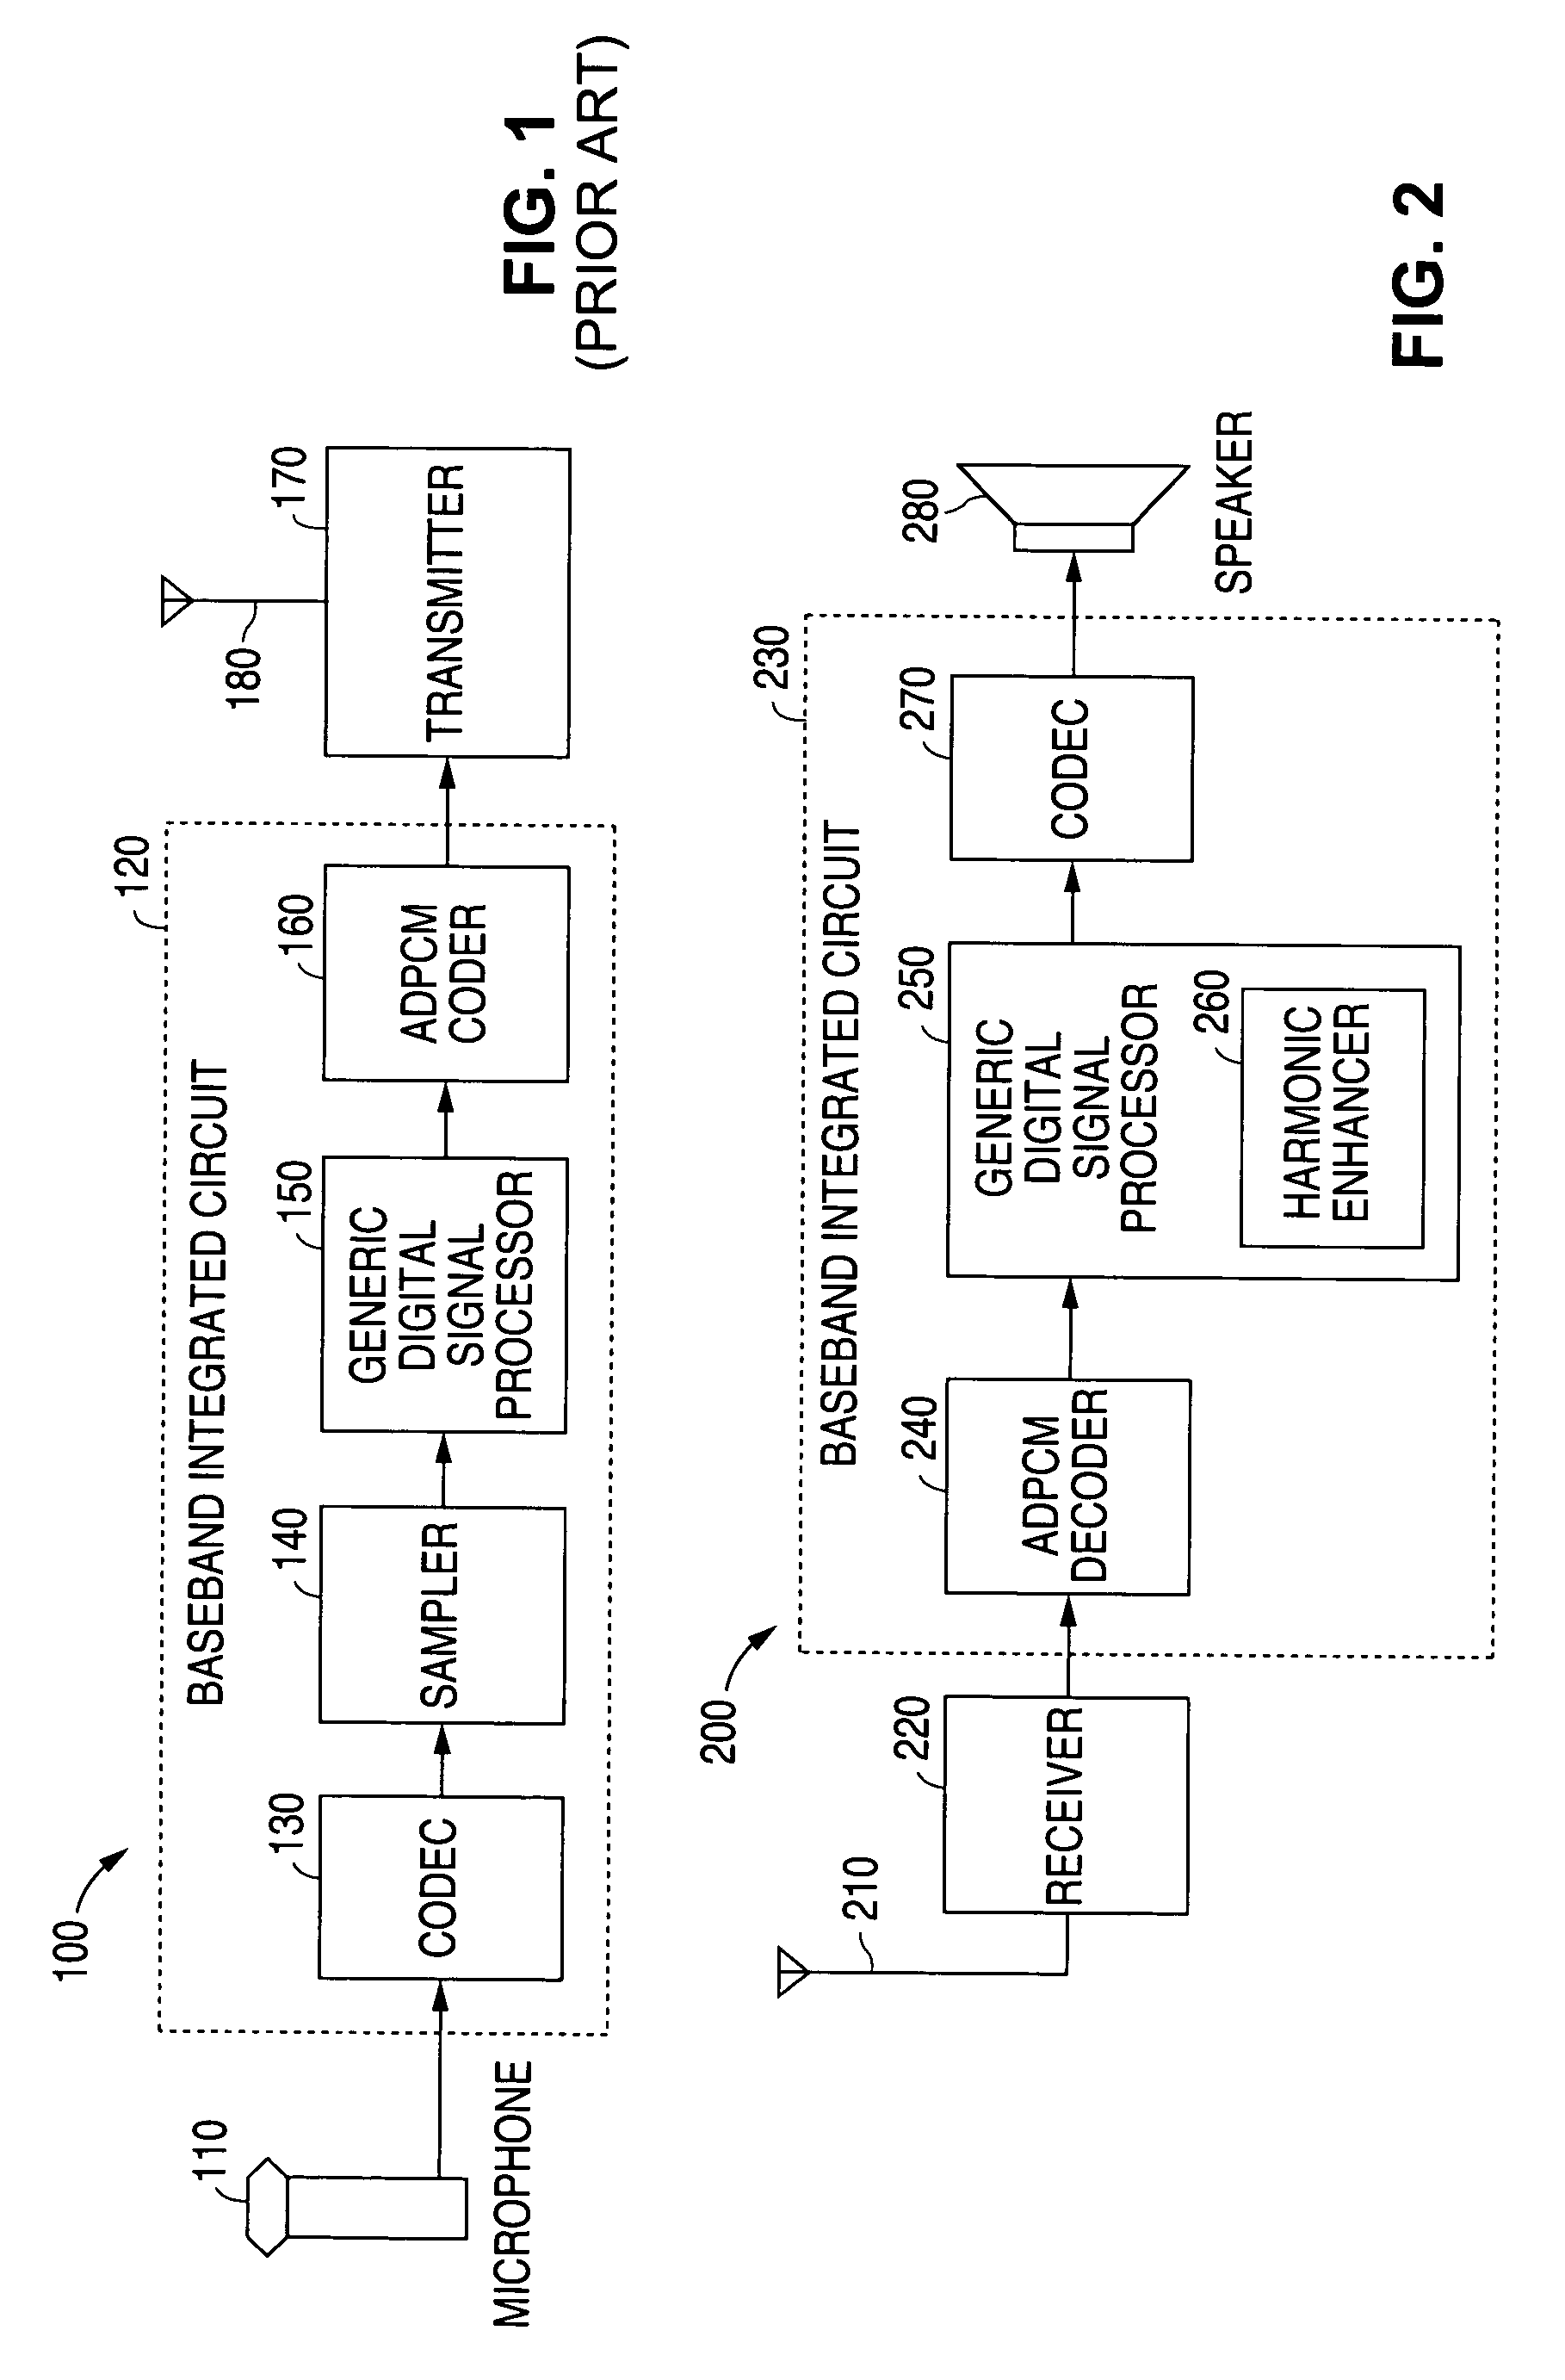 System and method for reconstructing high frequency components in upsampled audio signals using modulation and aliasing techniques